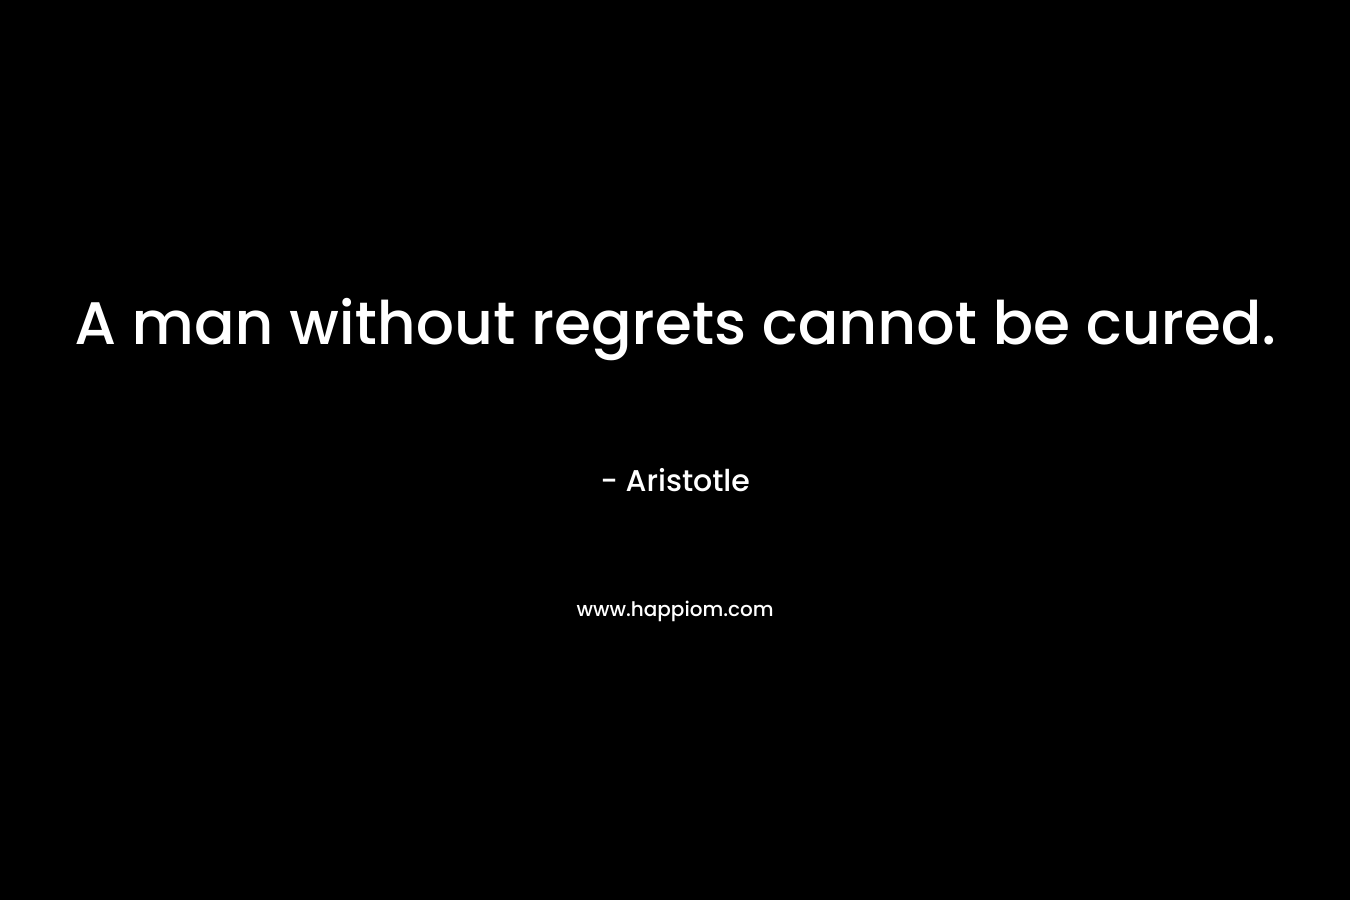 A man without regrets cannot be cured. – Aristotle